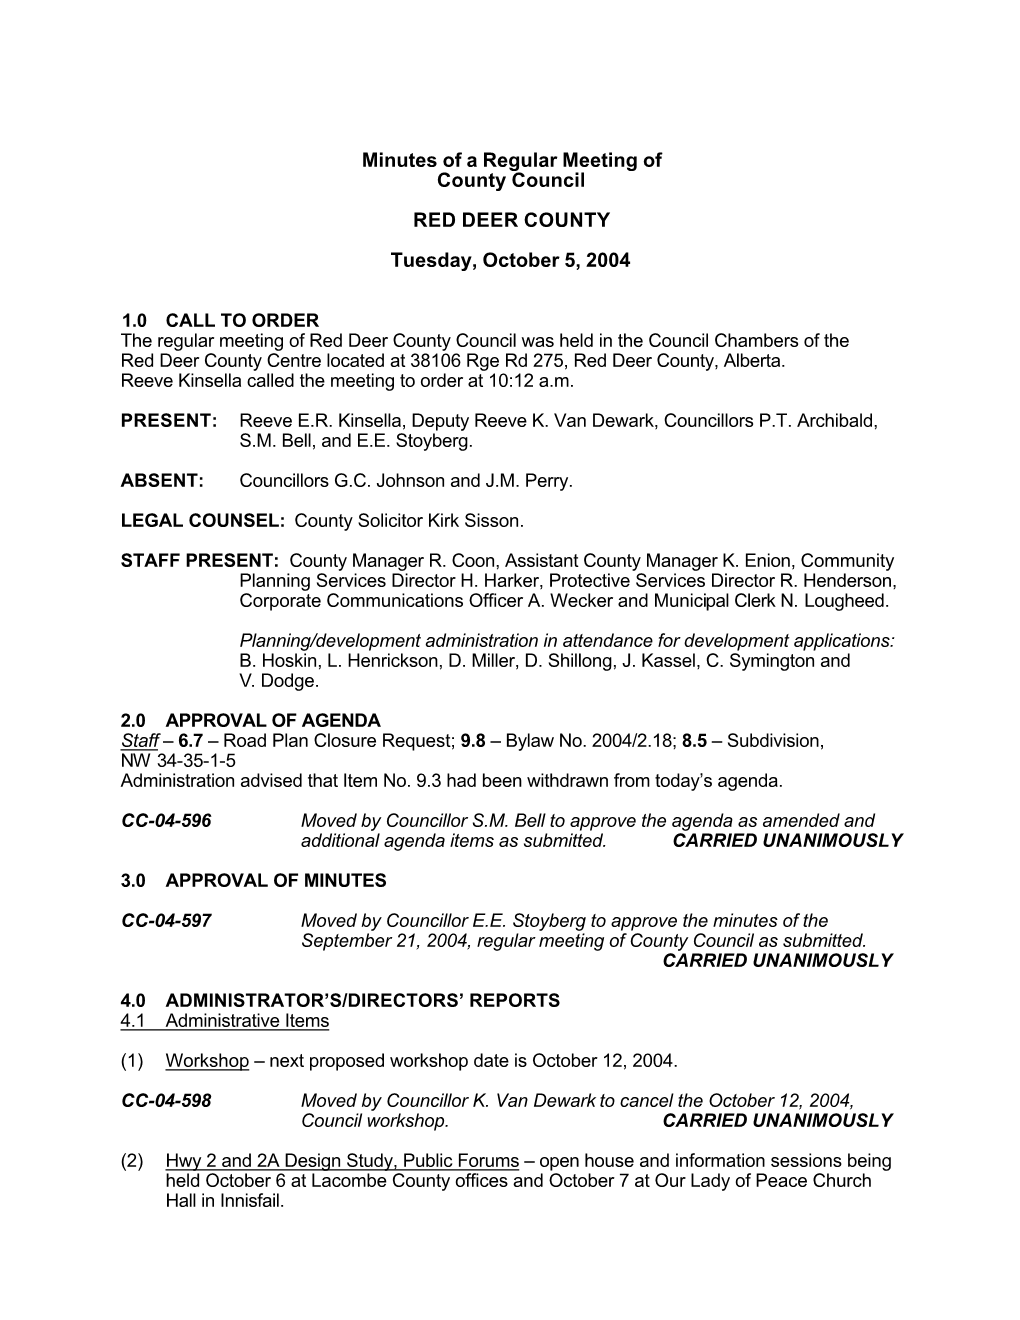 Minutes of a Regular Meeting of County Council RED DEER